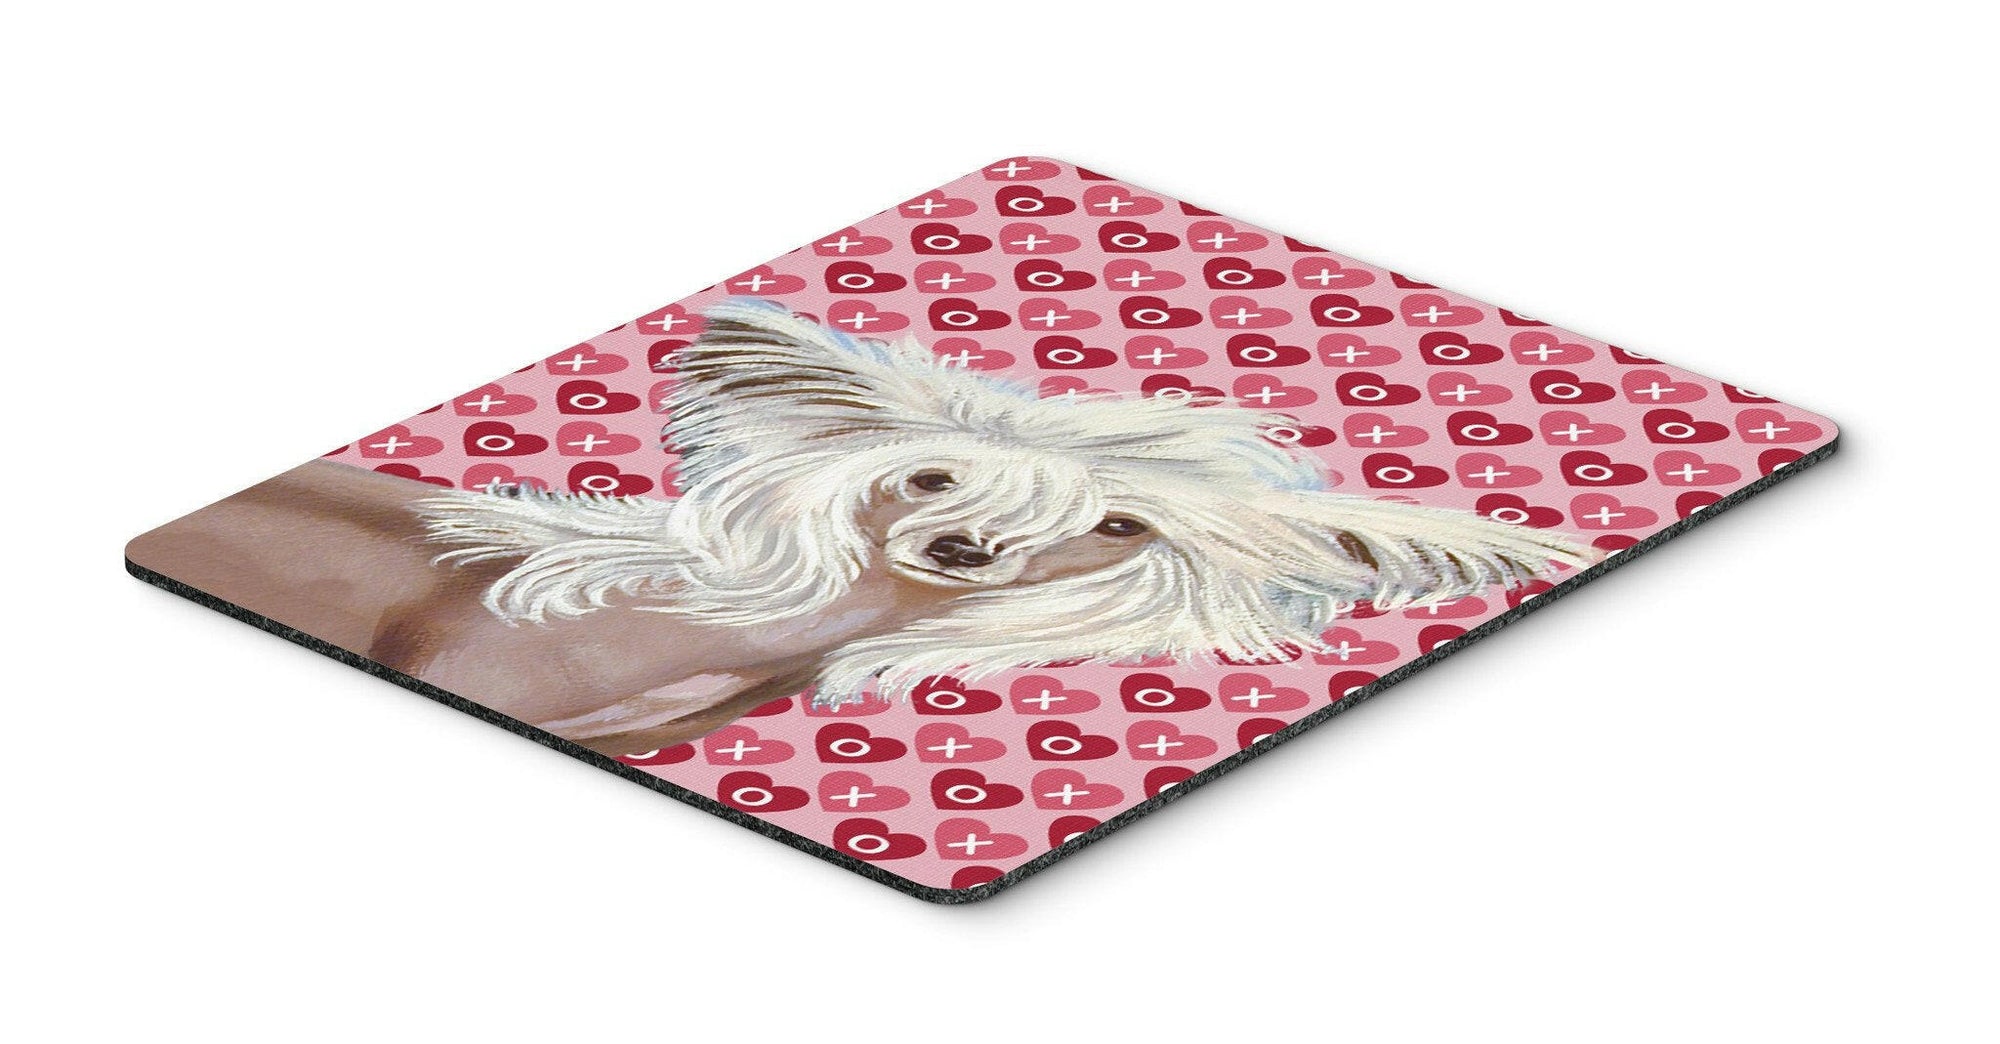 Chinese Crested Hearts Love and Valentine's Day Mouse Pad, Hot Pad or Trivet by Caroline's Treasures